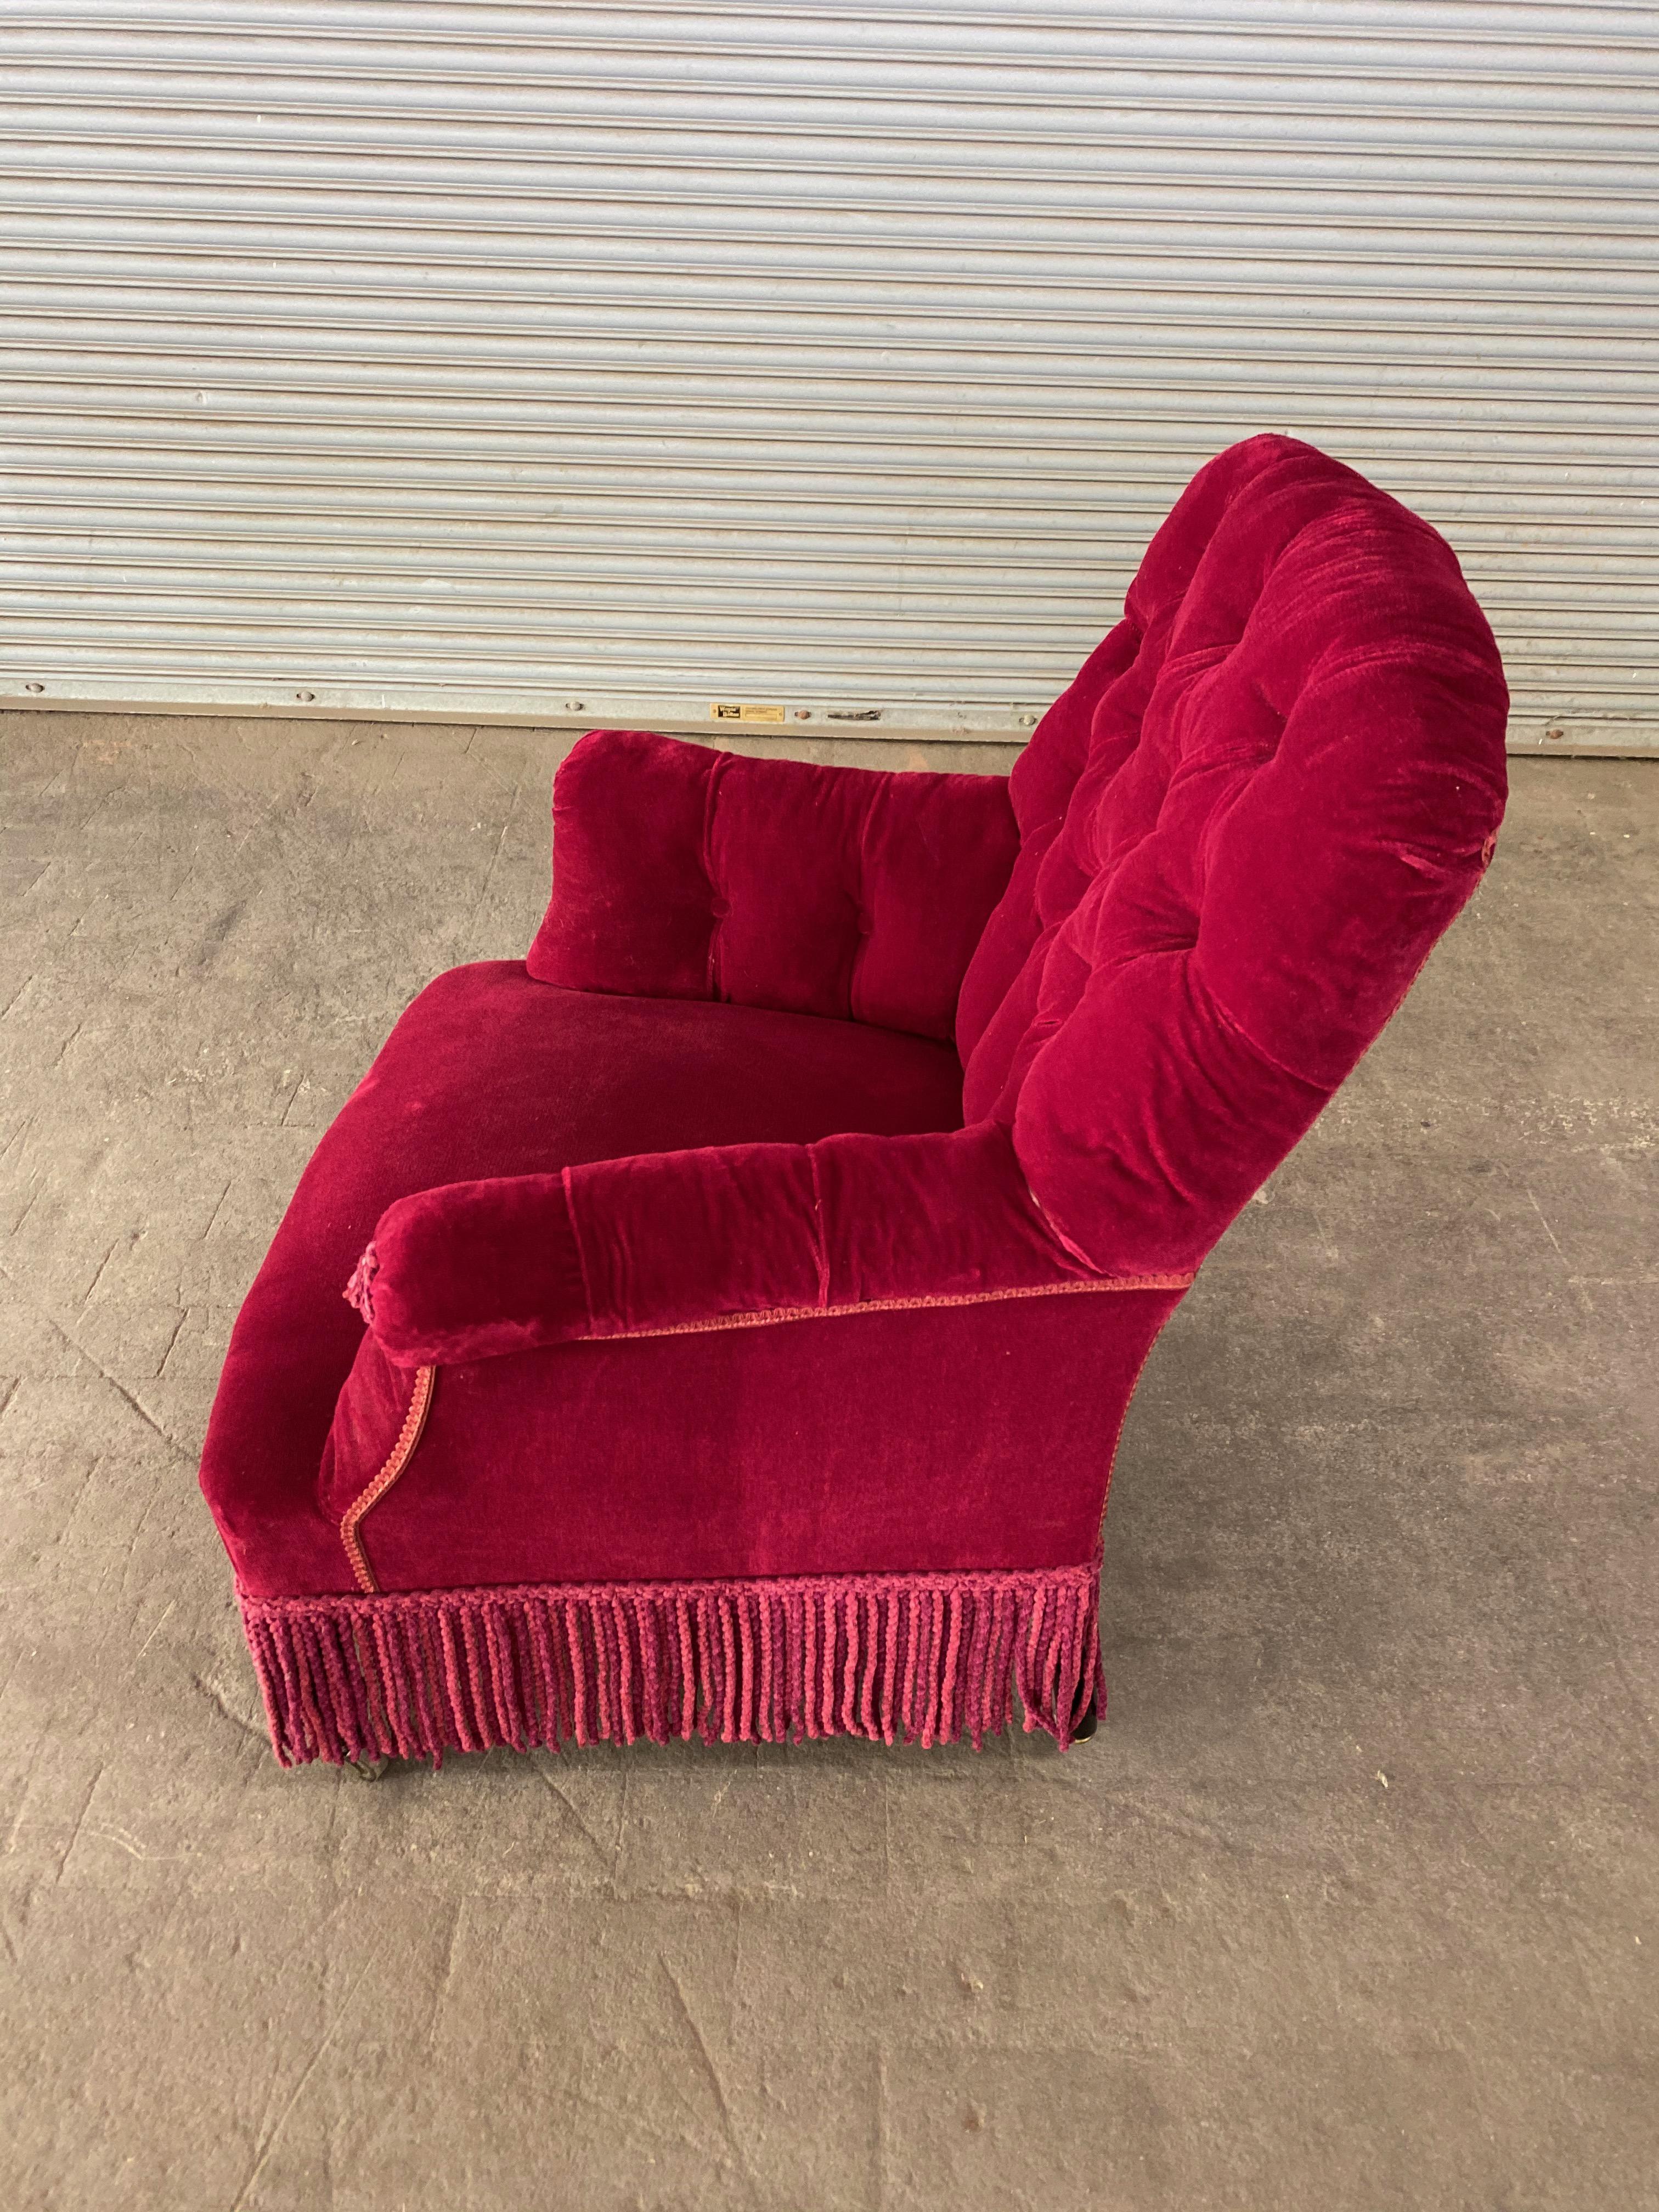 19th Century French Napoleon III Tufted Armchair in Red Velvet